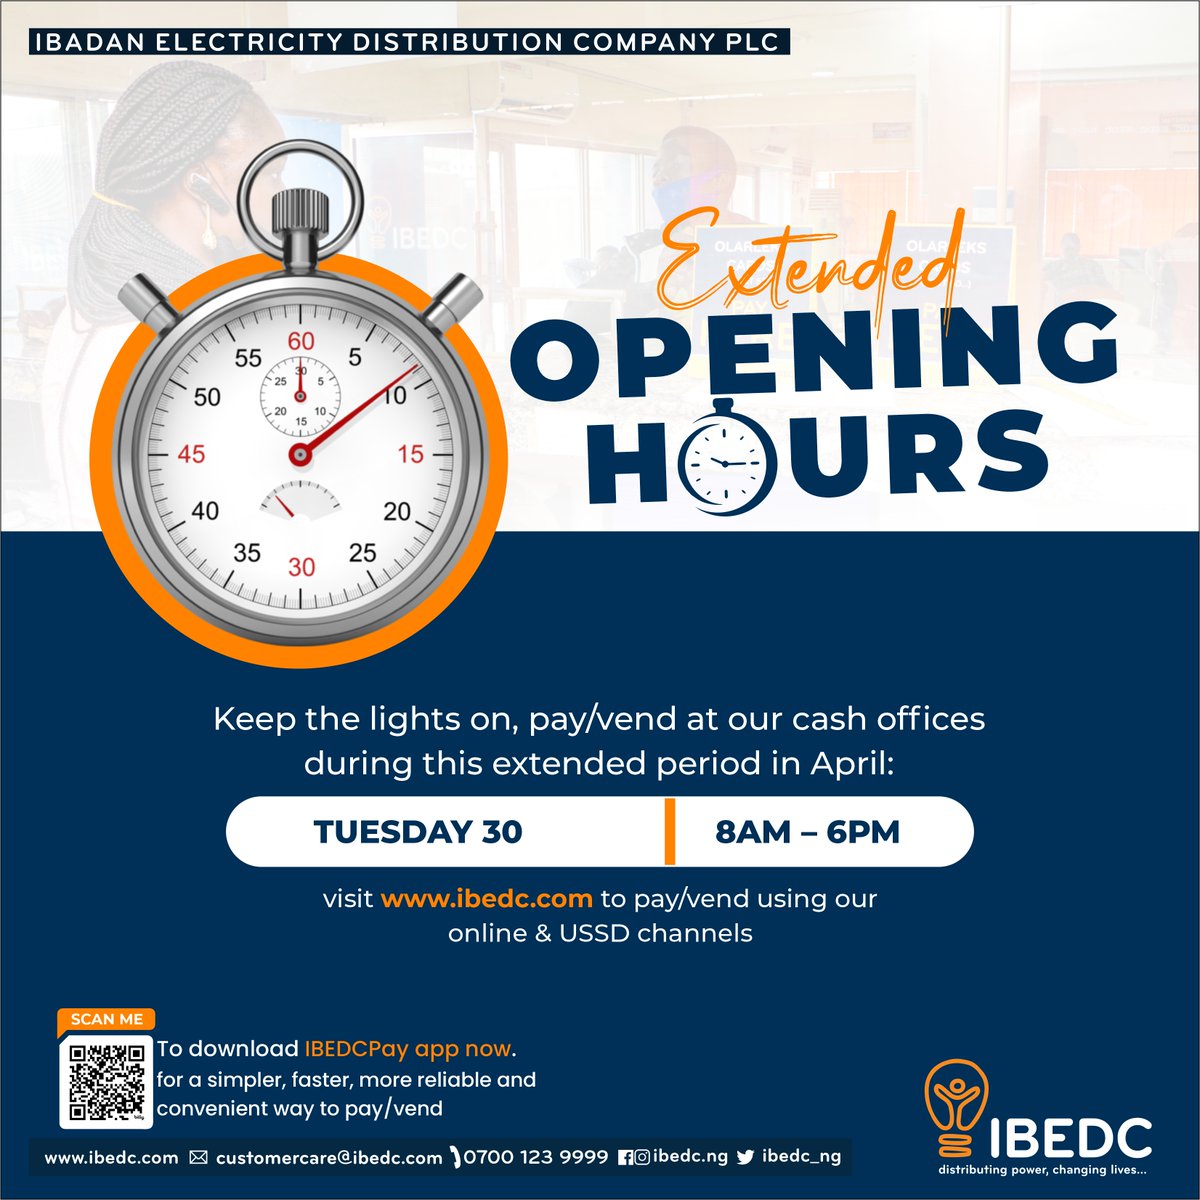 To enable us serve you better, our cash offices will be open for extended hours for the month of April. Kindly visit any of our offices or take advantage of our hassle-free payment channels. #ibedc #extendedopeninghours #ibedcbills #hasslefreepayment #ibedcpayapp #ibedcpayment